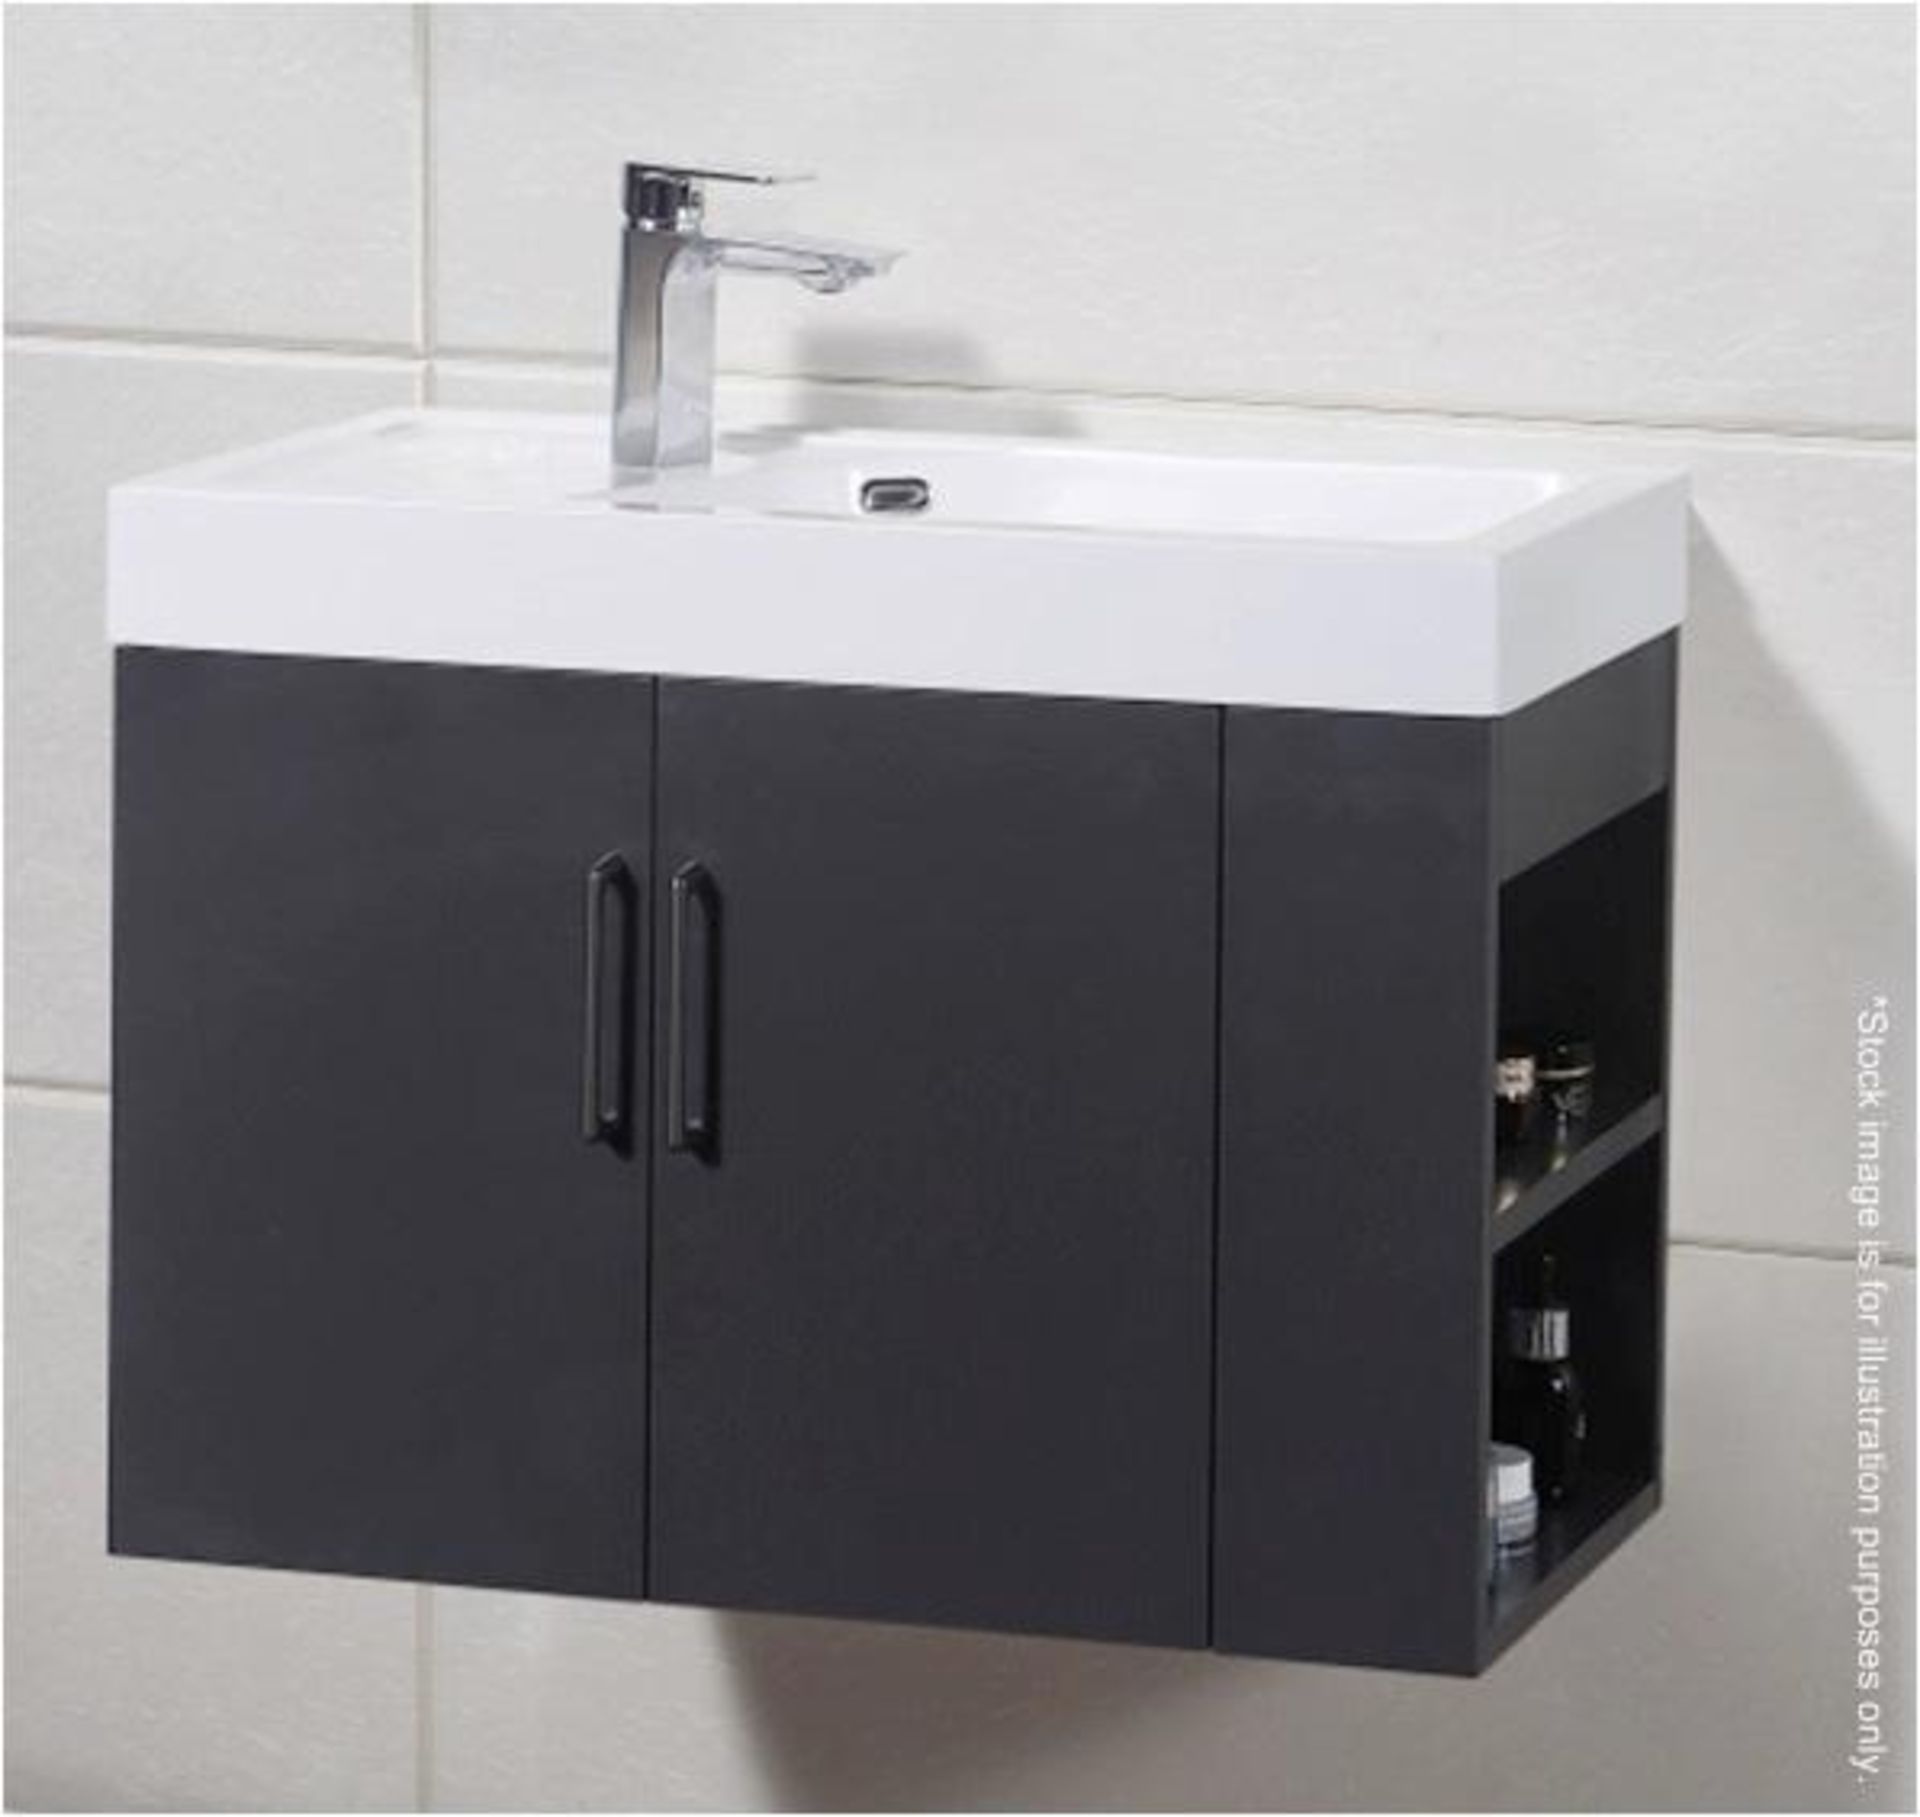 1 x Wall Hung Bathroom Vanity Unit Featuring A Gelcoat Coated Basin And Soft Close Drawers - Finish - Bild 2 aus 2